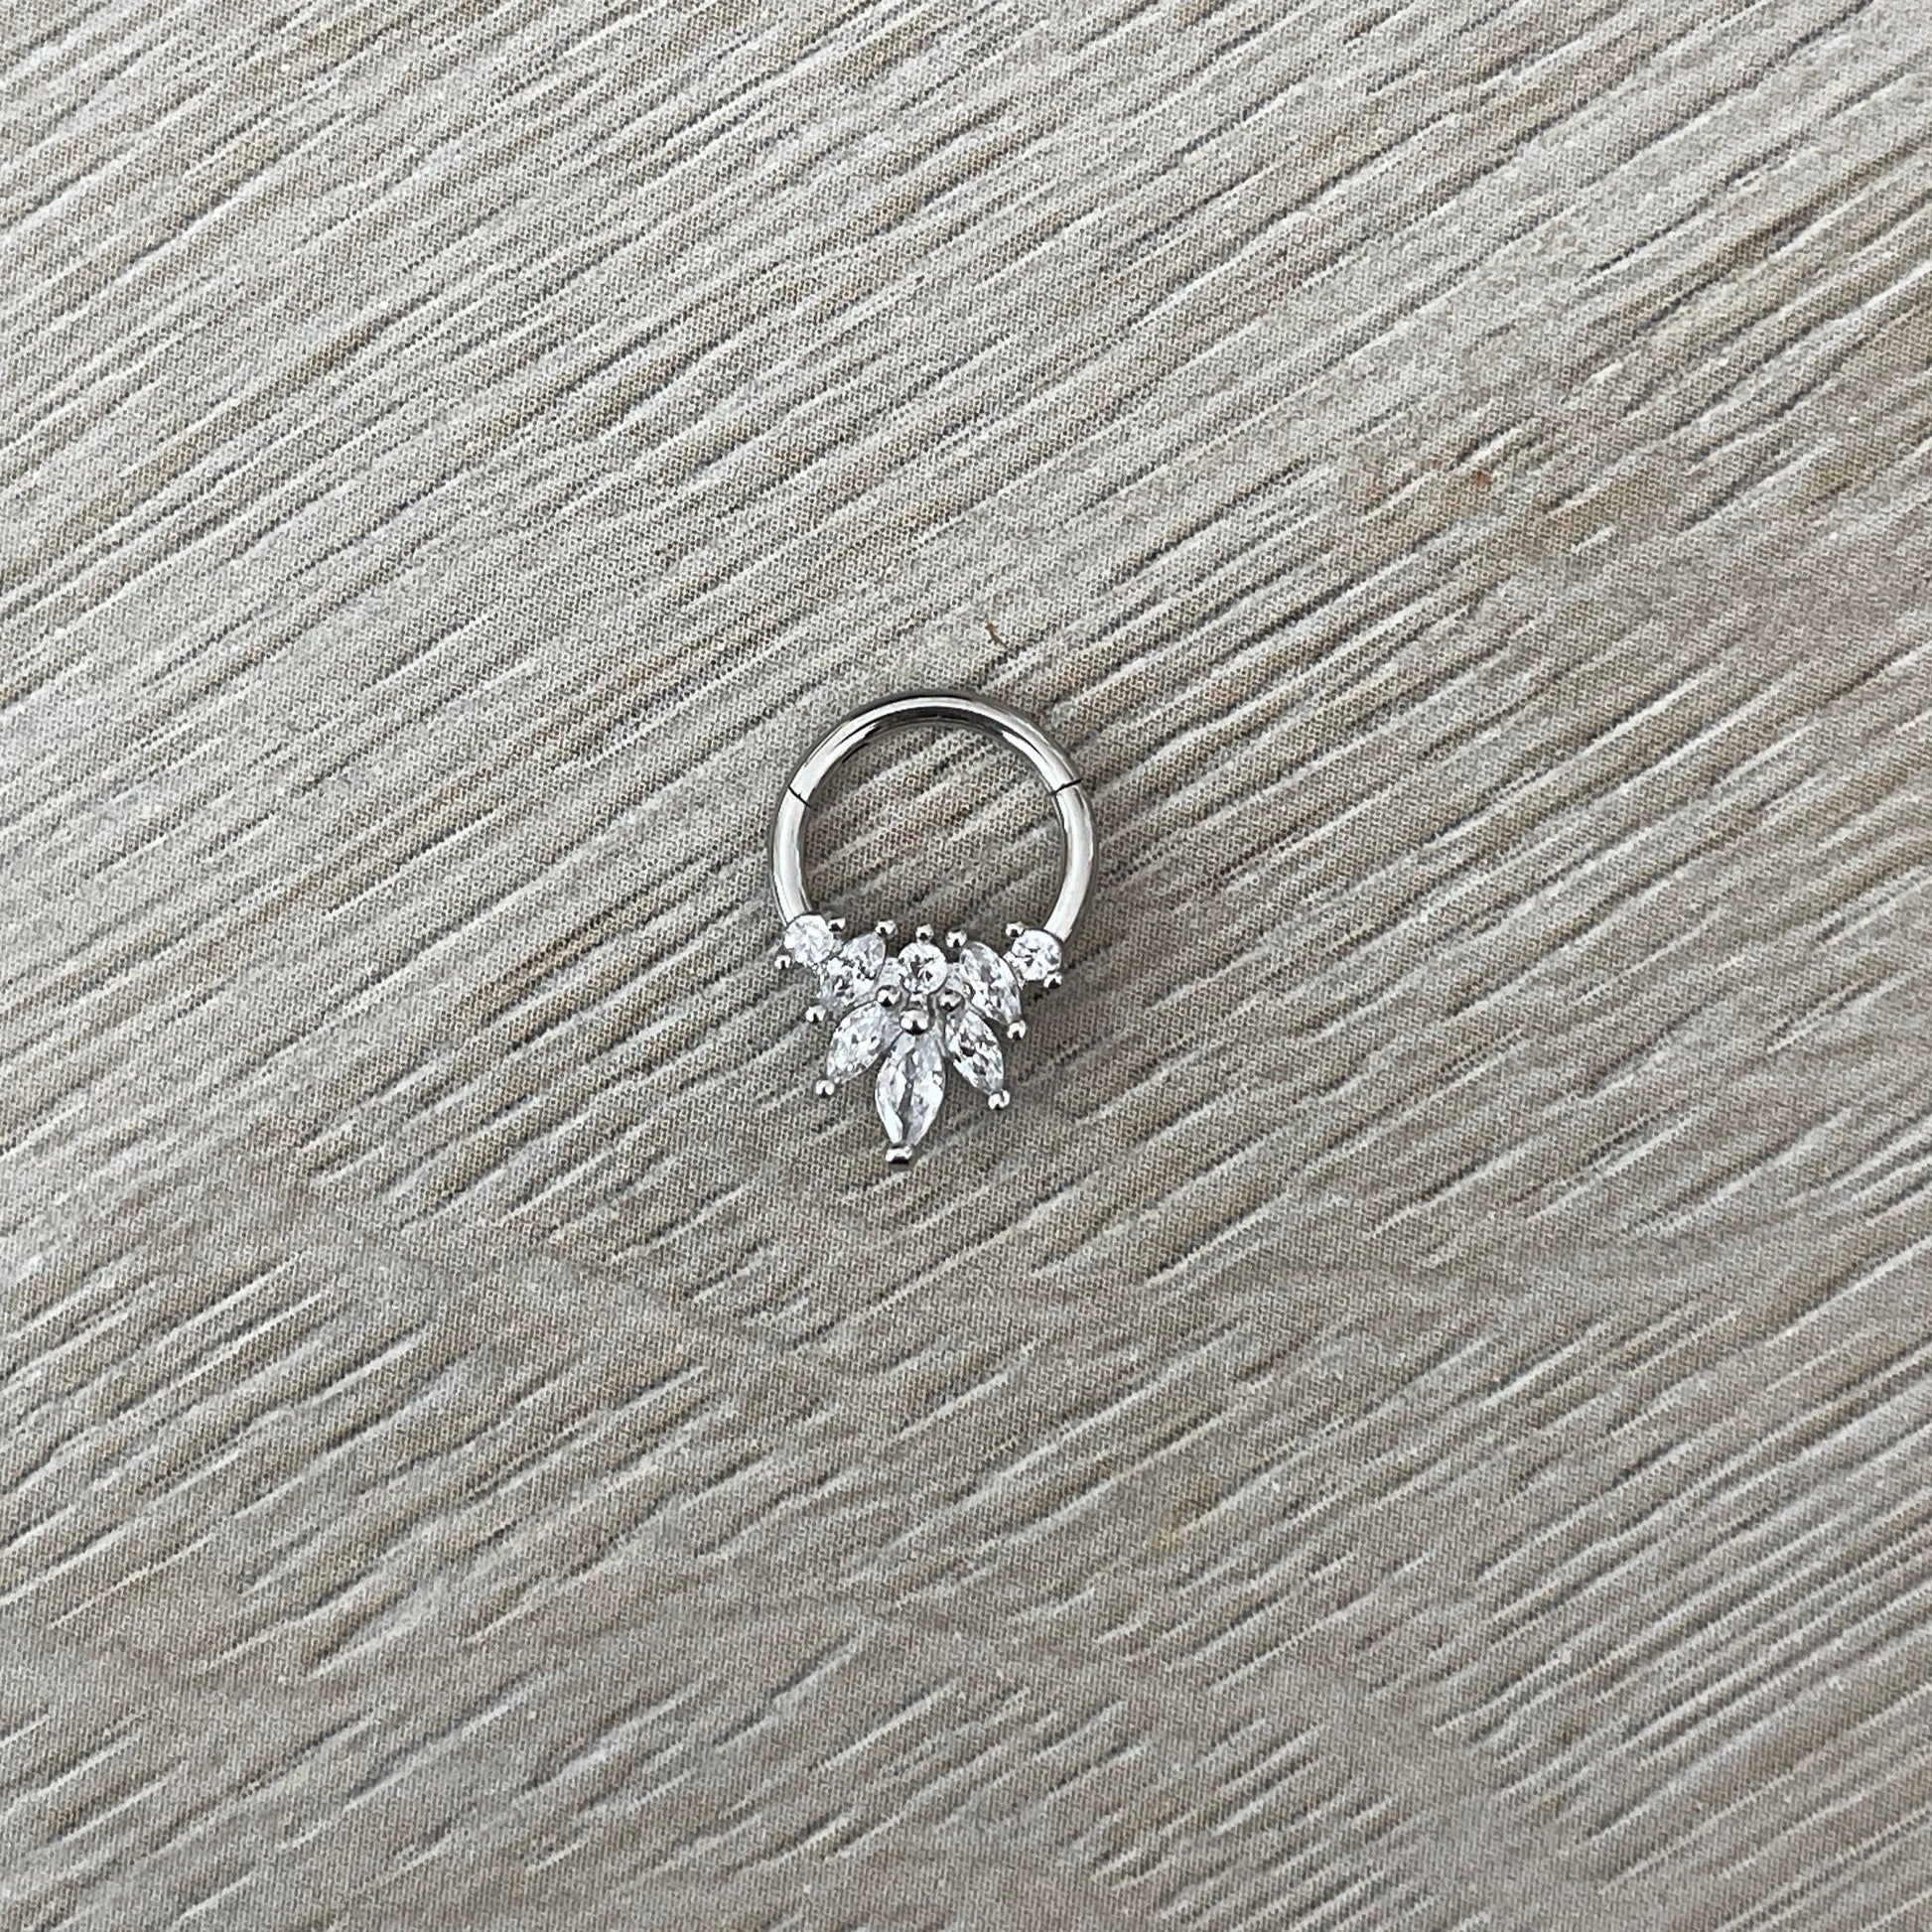 Silver CZ Septum Piercing (16G | 8mm or 10mm | Surgical Steel | Silver, Gold, or Rose Gold)